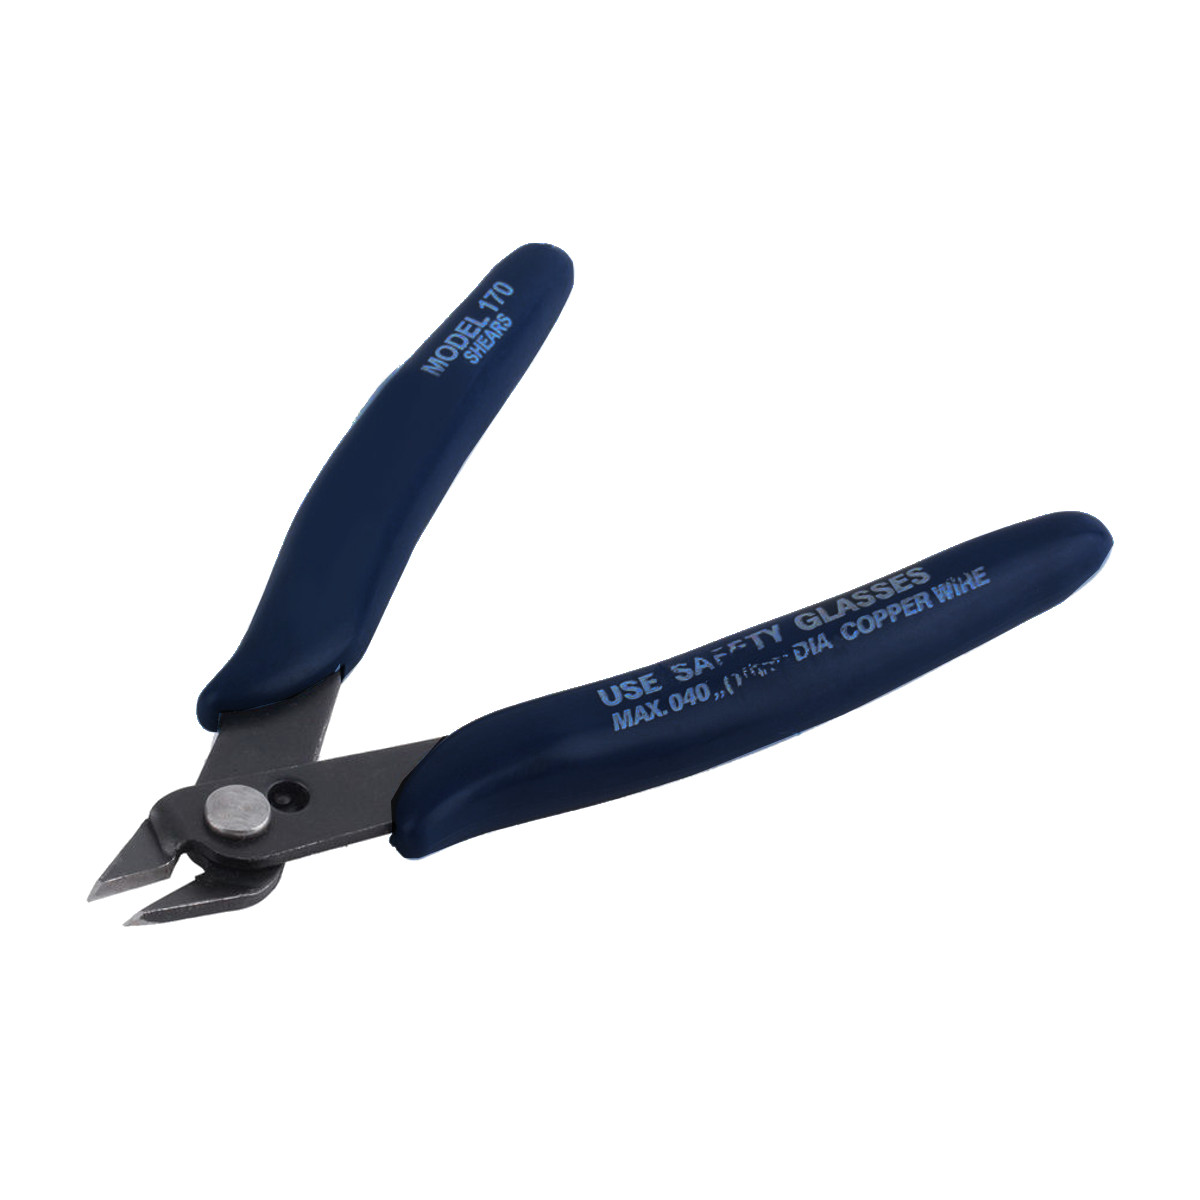 3PCS-DANIU-Electrical-Cutting-Plier-Wire-Cable-Cutter-Side-Snips-Flush-Pliers-Tool-1423303